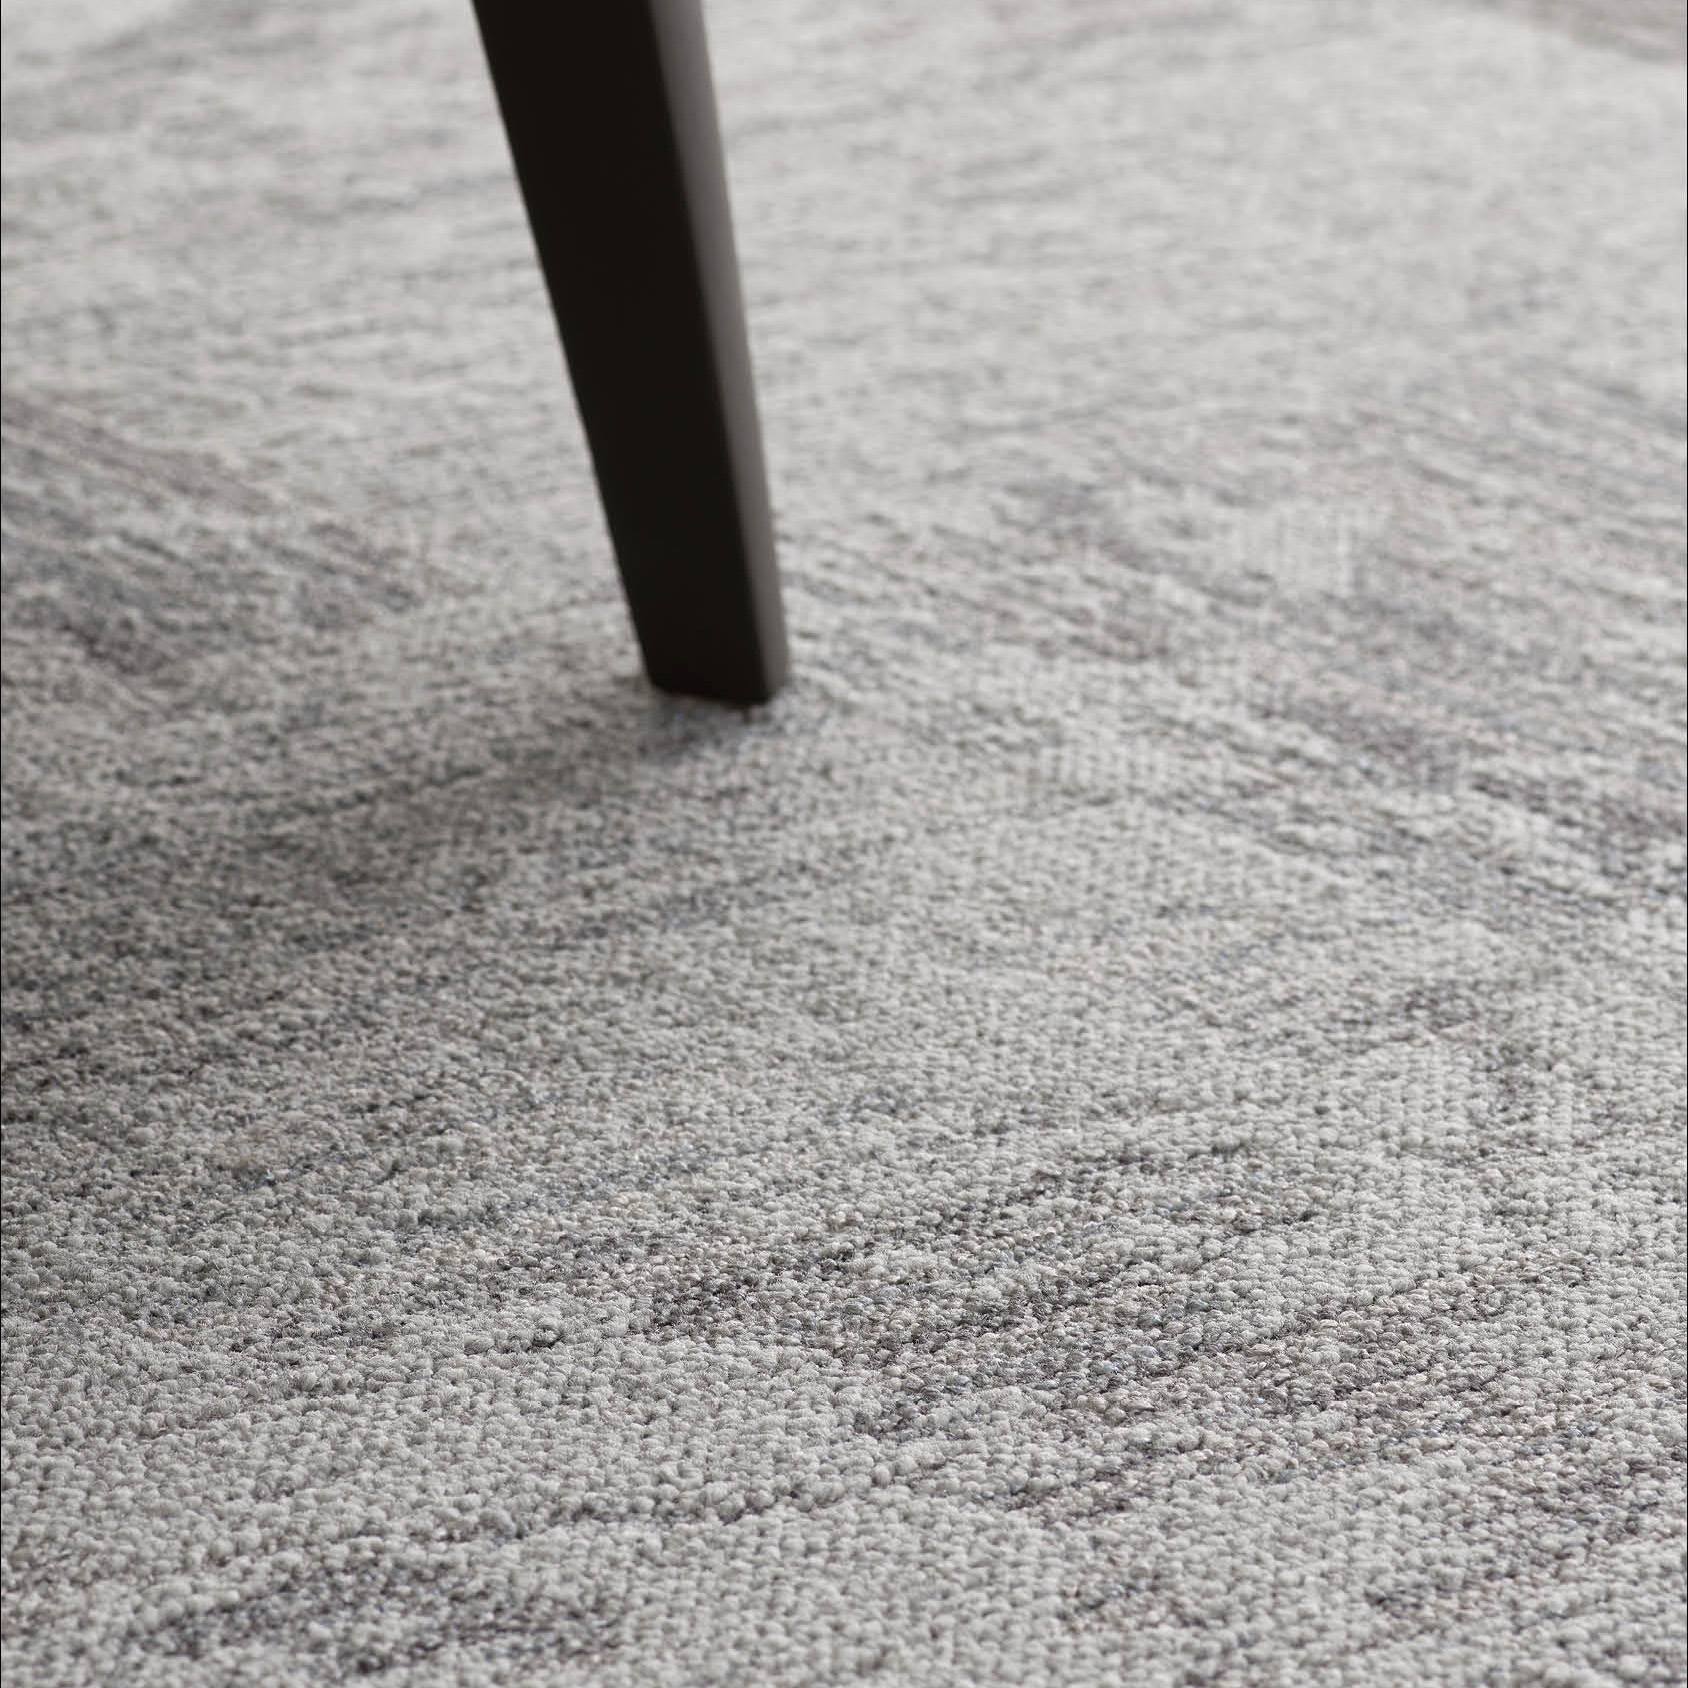 Desso Breccia Carpet Tile in a commercial office space in dark grey with table peg